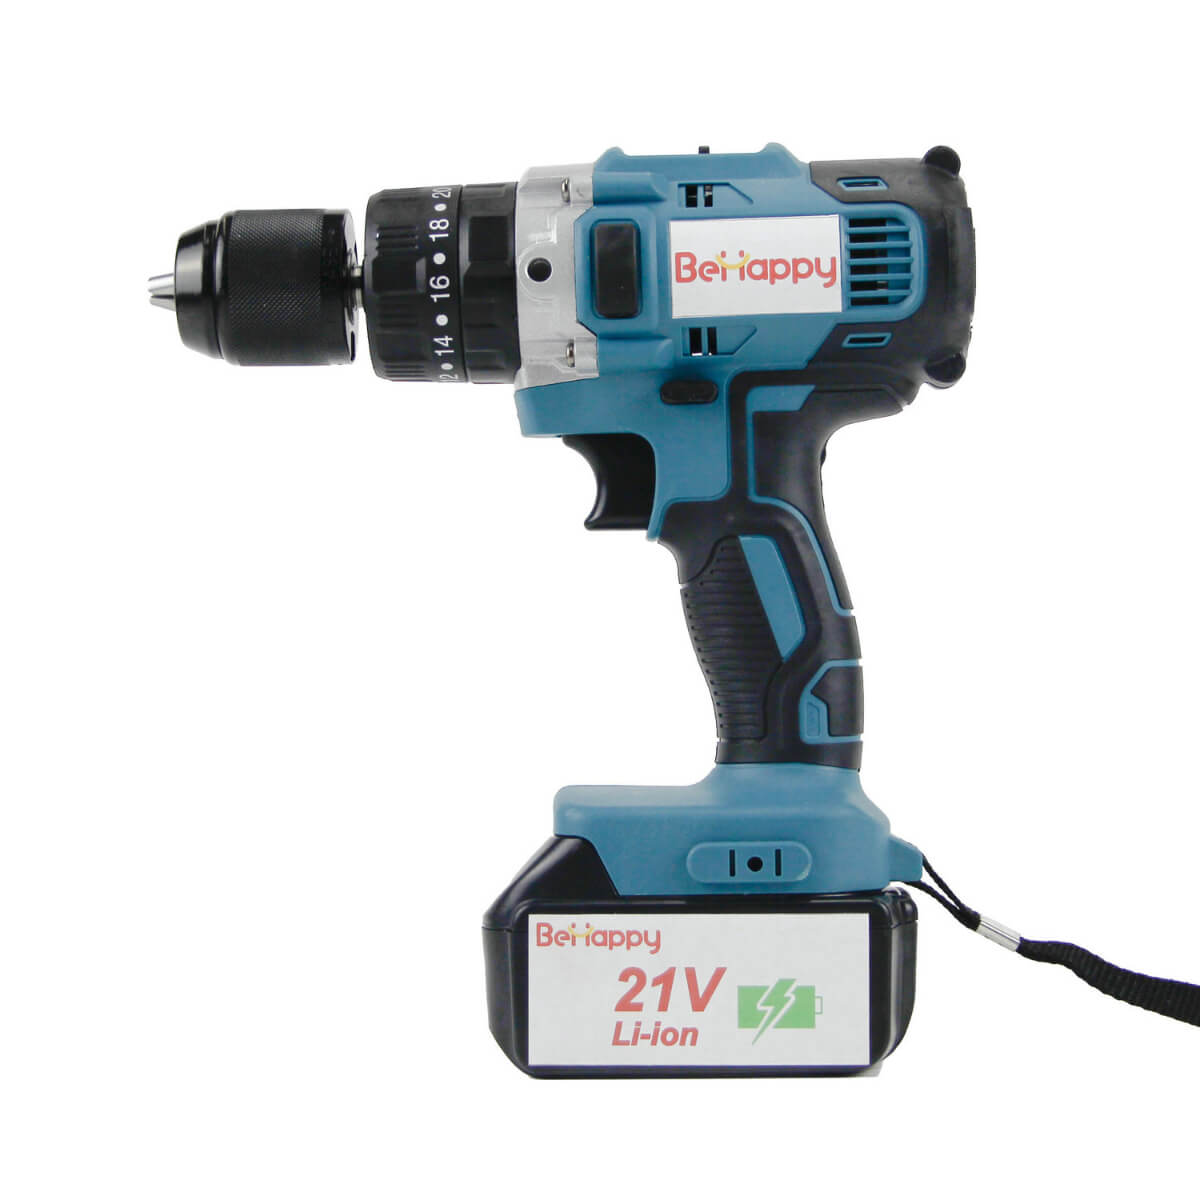 21V brushless electric hand drill B